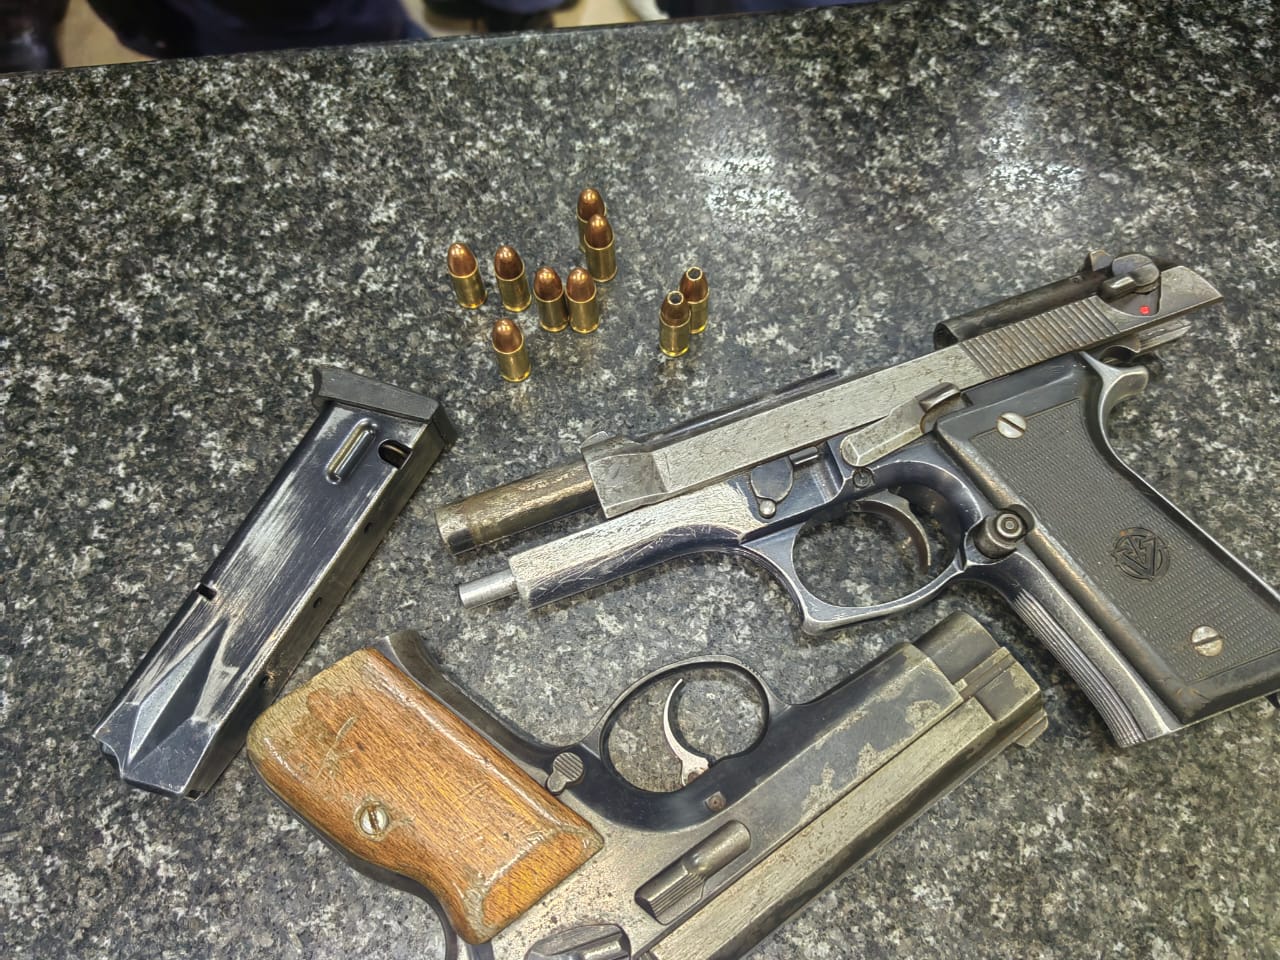 Police in Ekurhuleni District arrested three alleged hijackers and recovered two unlicensed firearms in Alberton